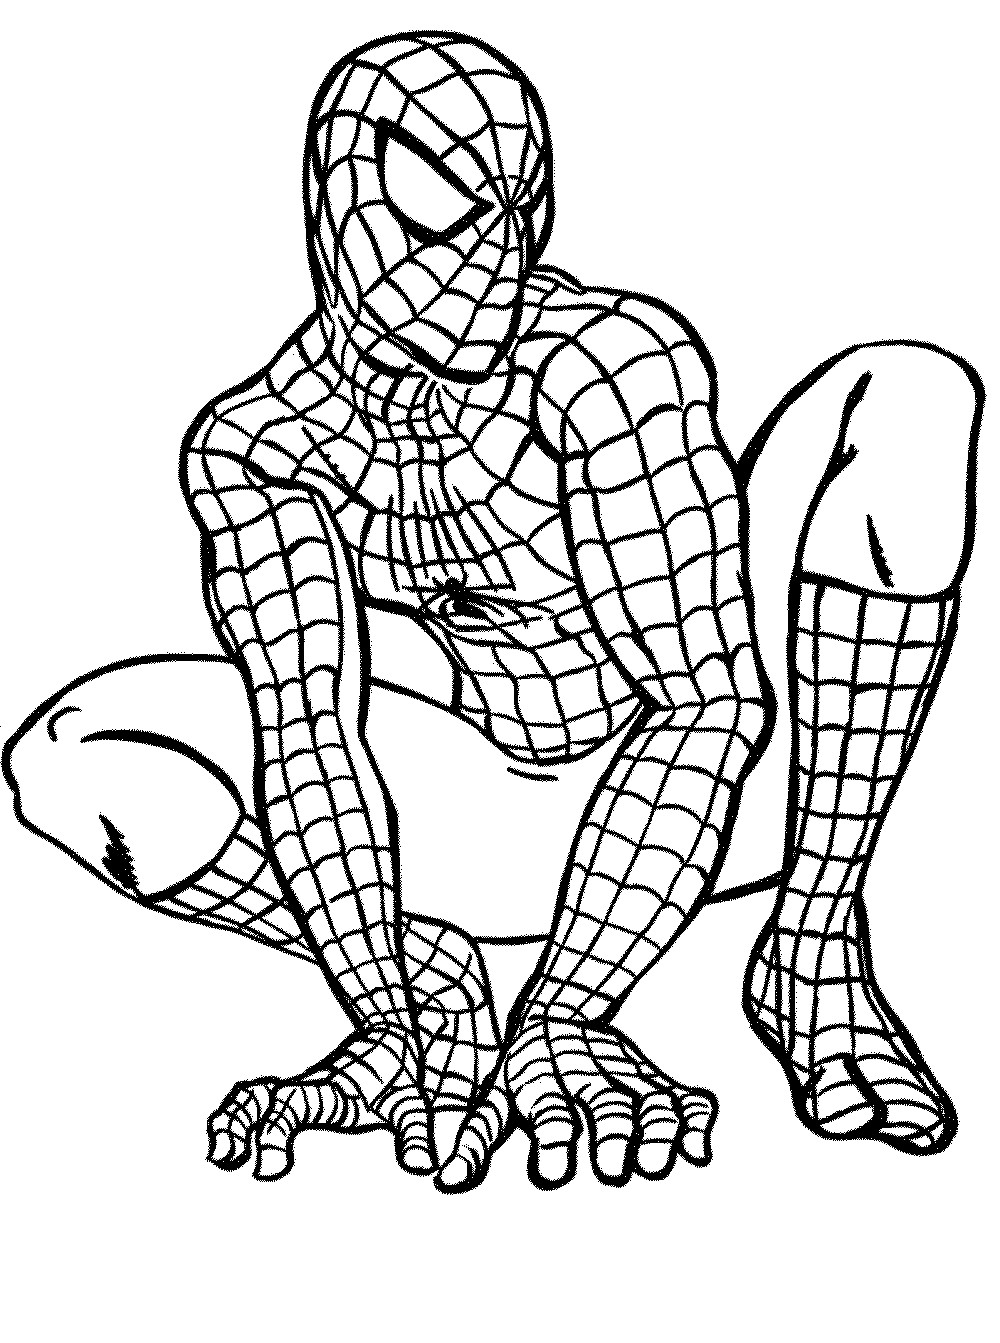 Spiderman Coloring Book
 Free Coloring Book Spiderman Coloring Pages New By